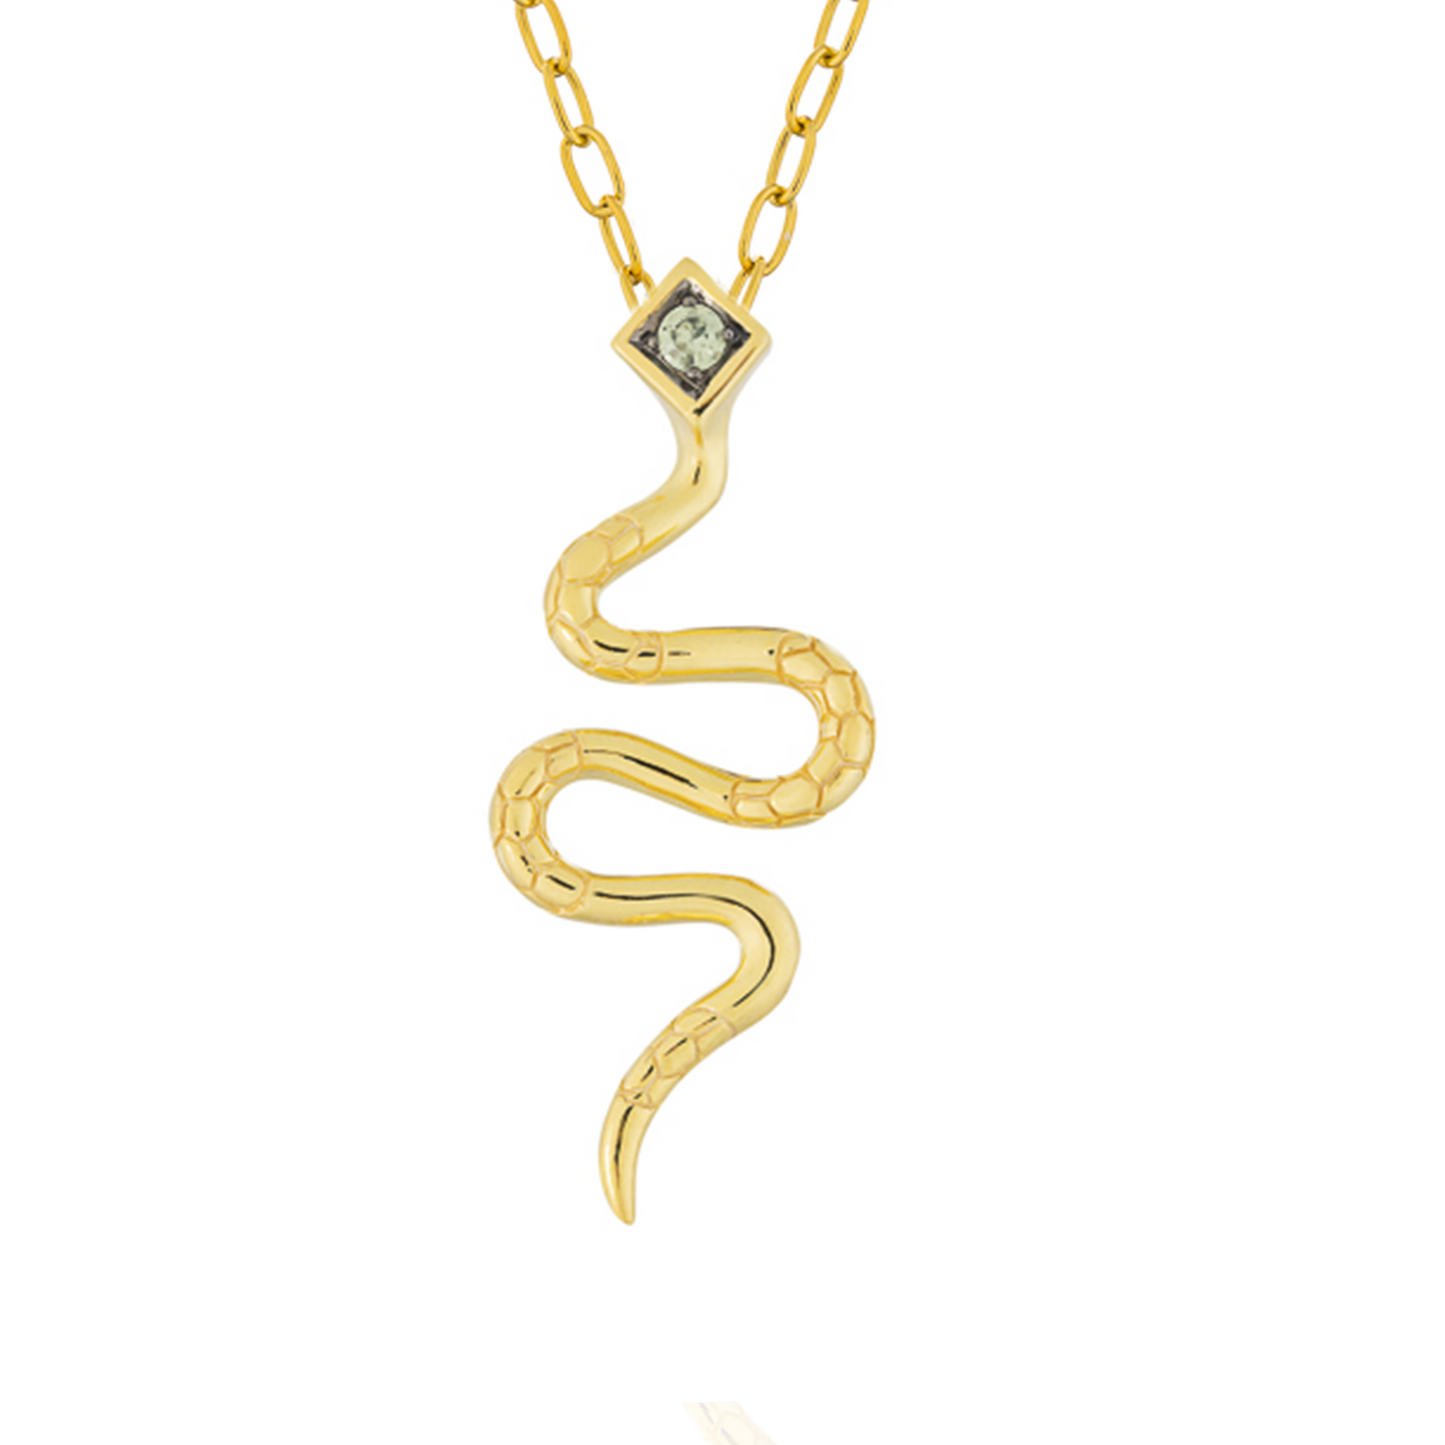 Serpentine 925 Silver  Snake Necklace Yellow Gold Plated with Green Sapphire